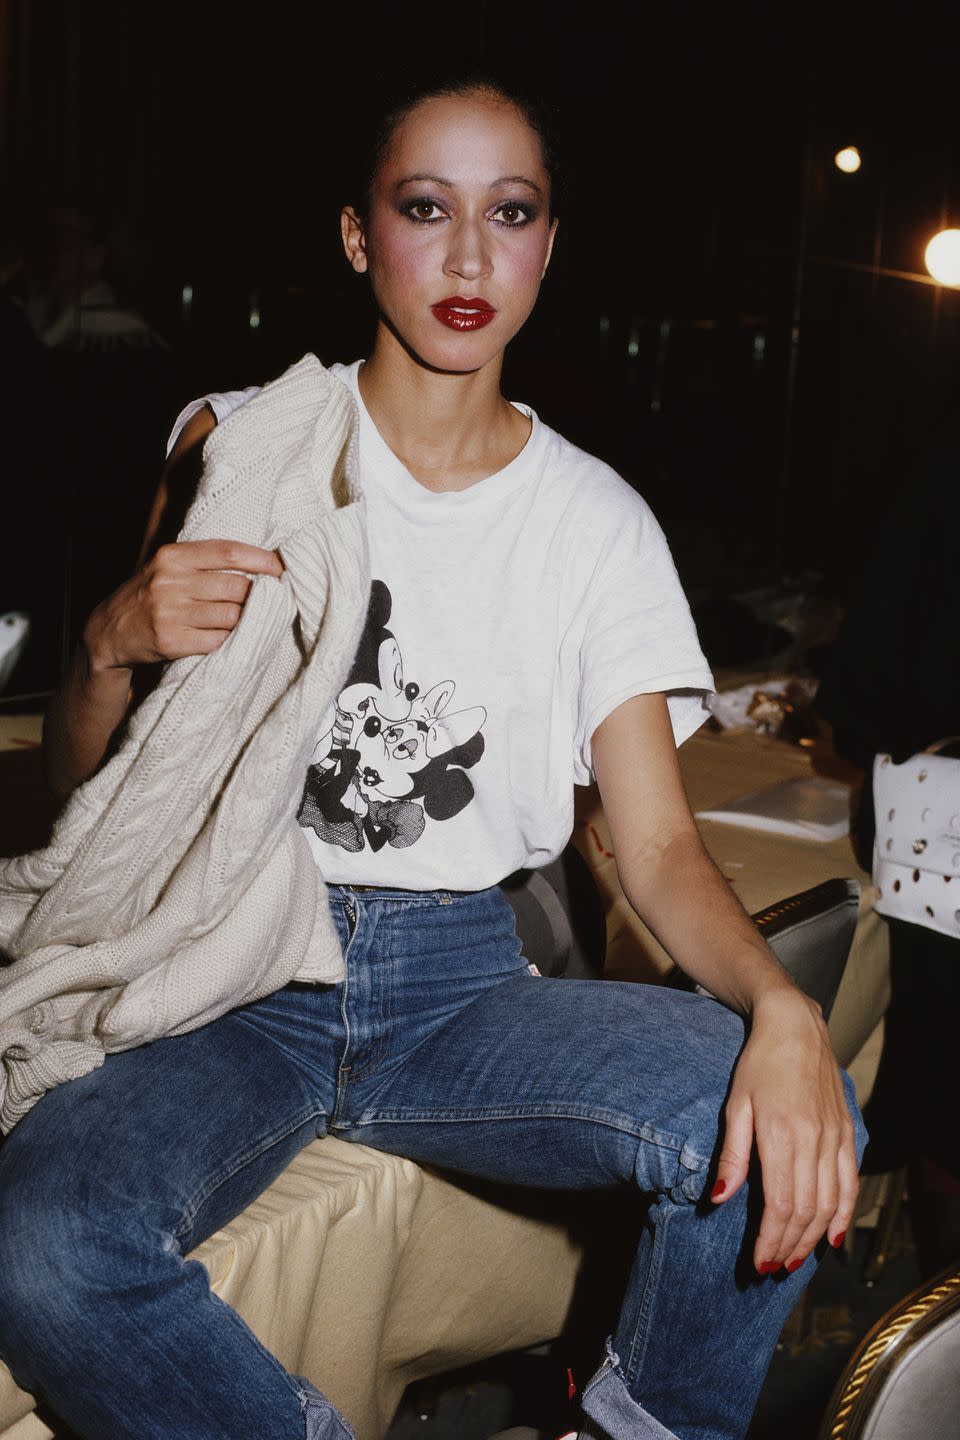 pat cleveland in a mickey mouse tshirt and jeans